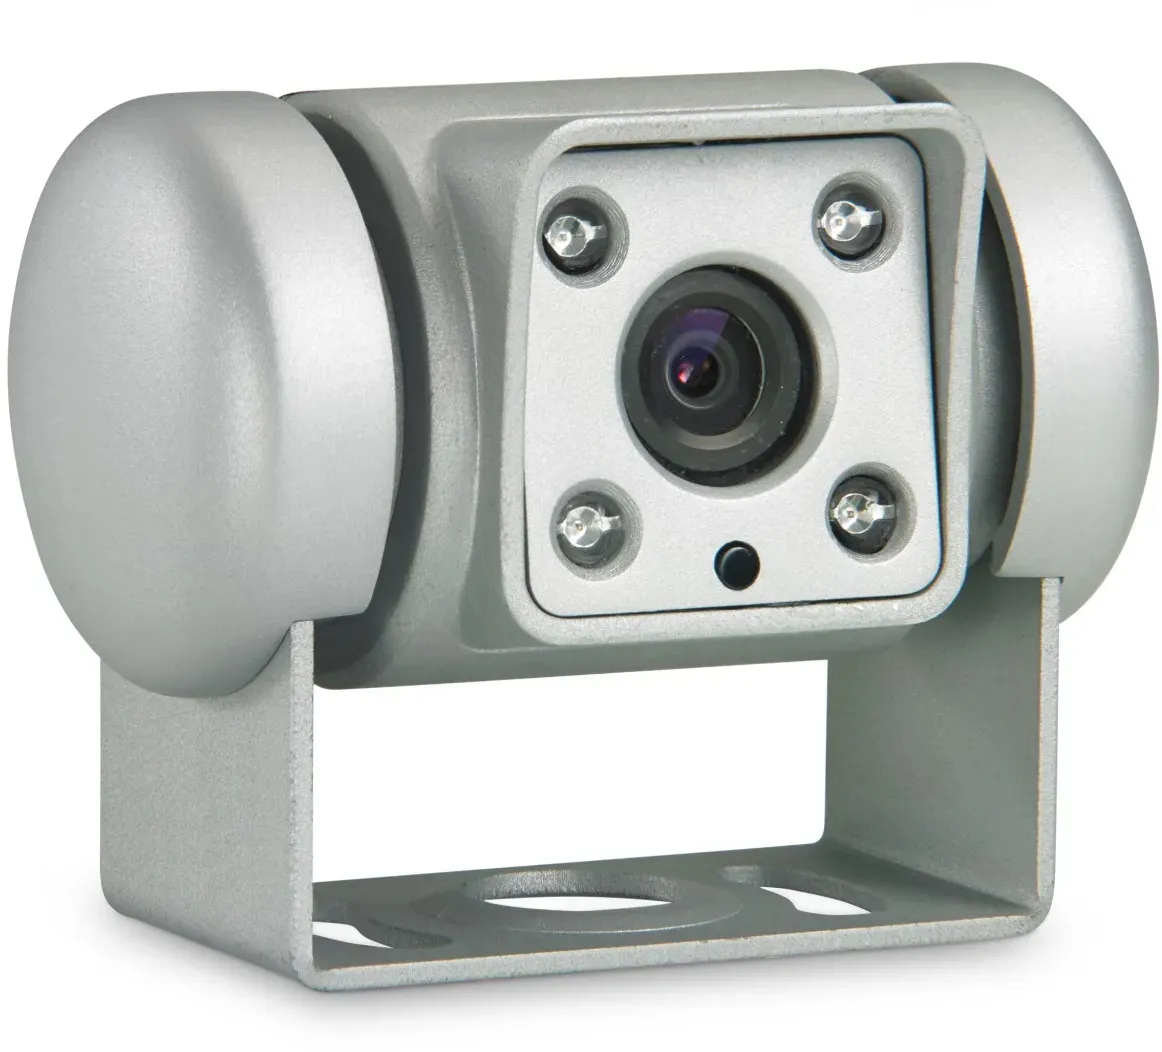 CAM45 CCD rear view camera